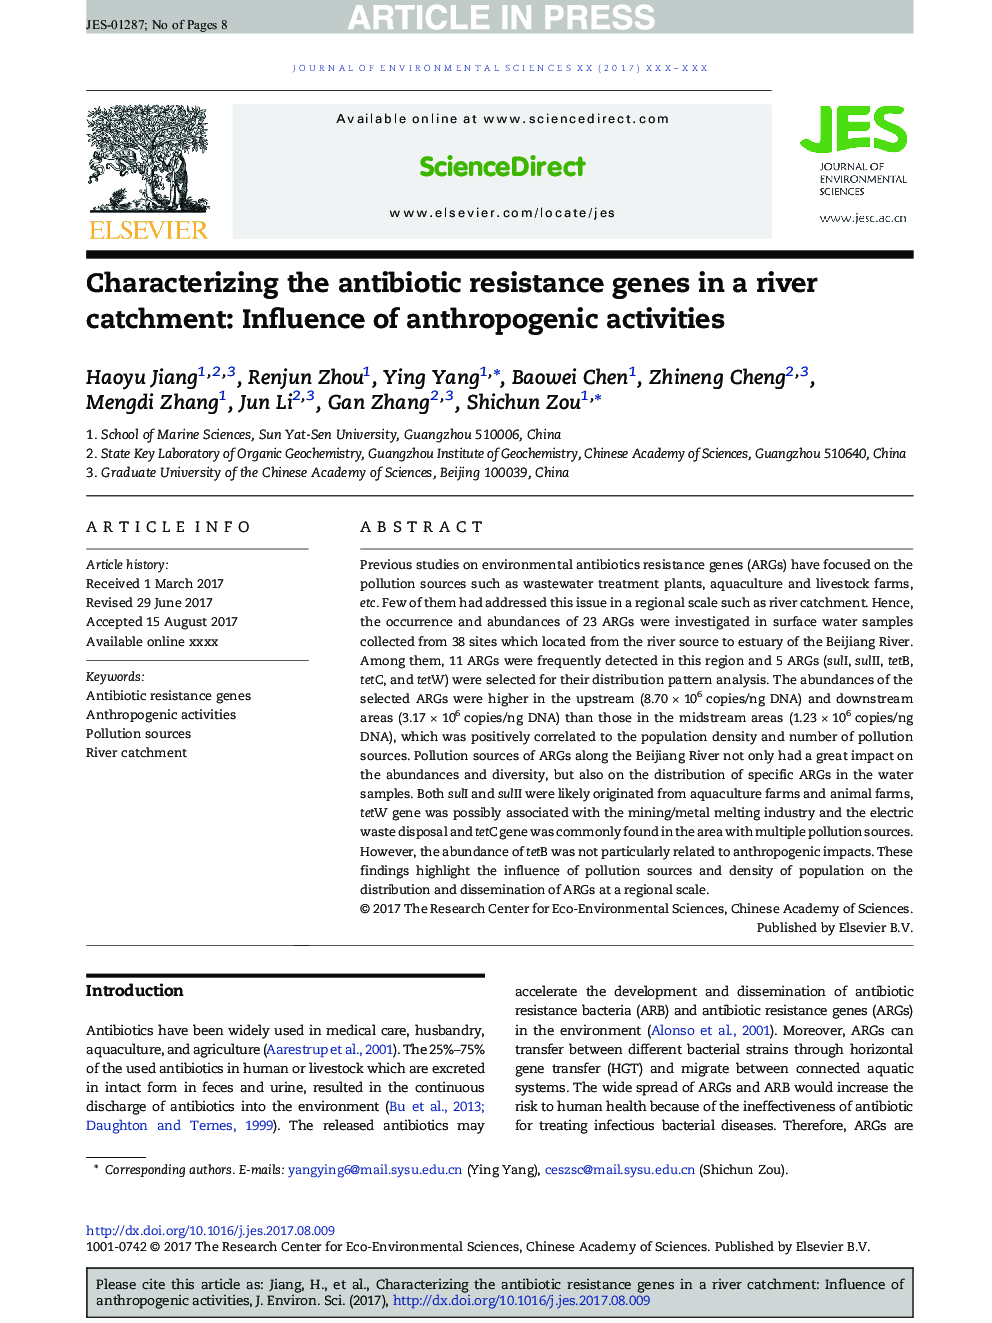 Characterizing the antibiotic resistance genes in a river catchment: Influence of anthropogenic activities